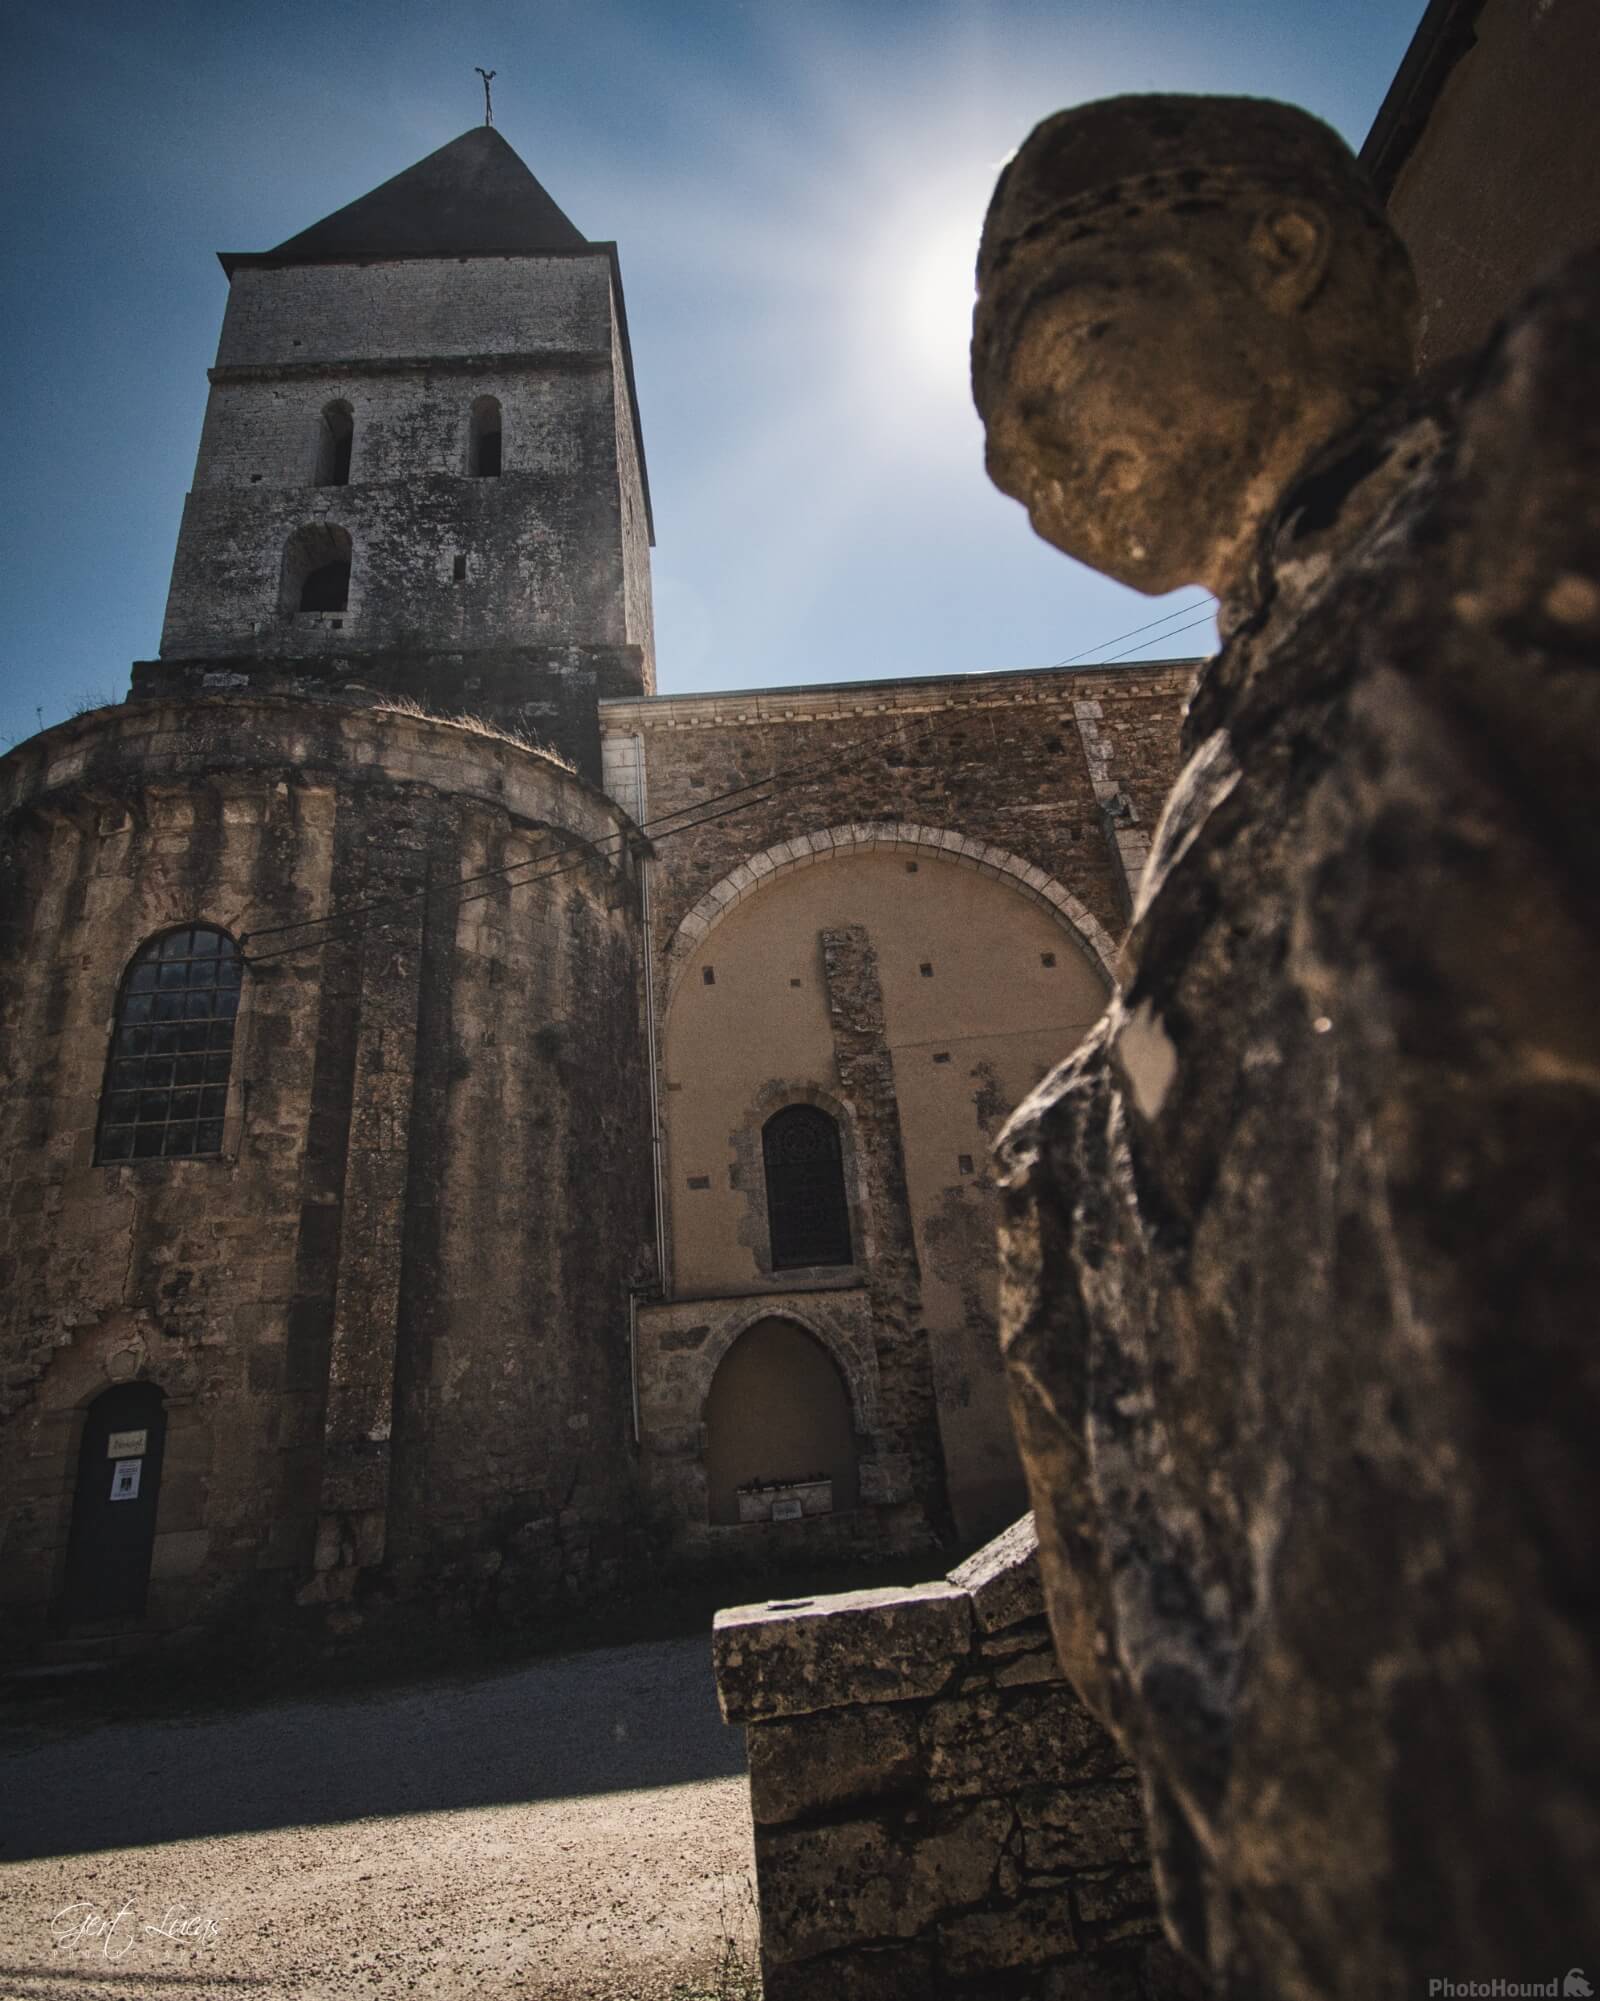 Image of Saint Peters Abbey in Tourtoirac by Gert Lucas